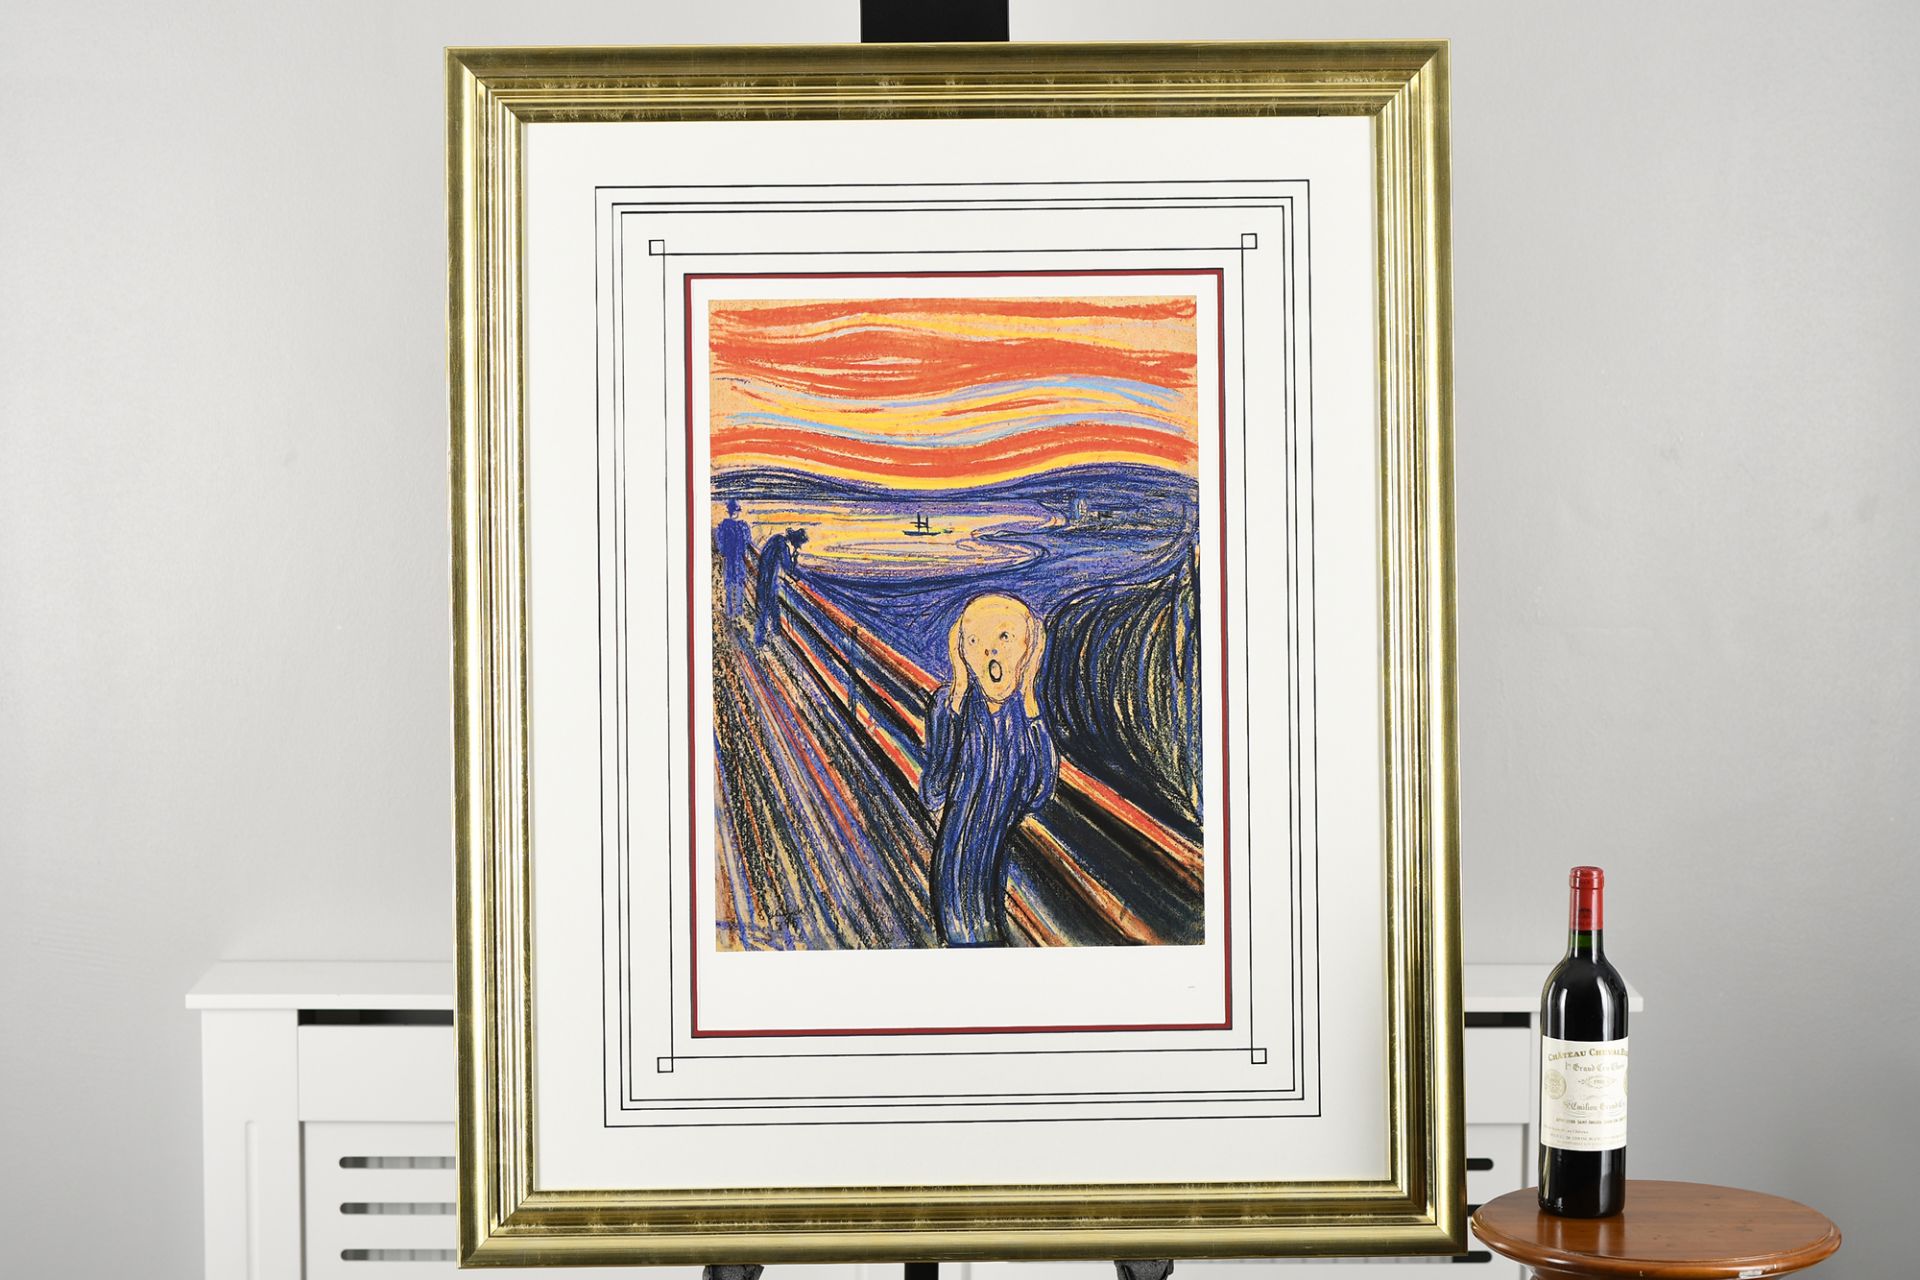 Edvard Munch Limited Edition "The Scream" - Image 4 of 10